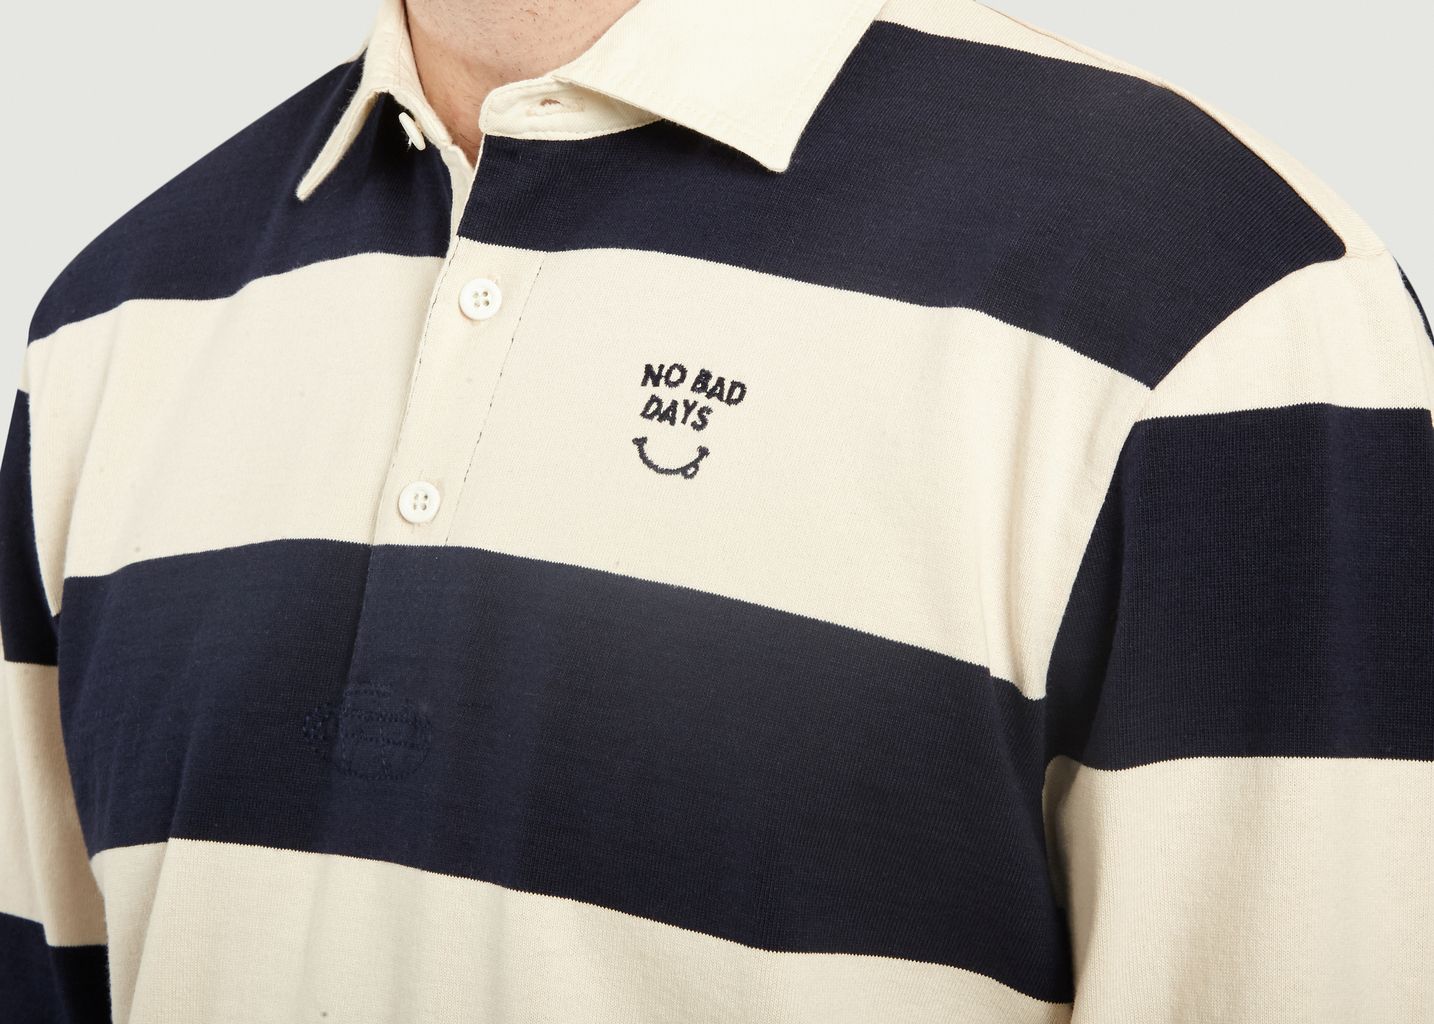 No Bad Days long sleeves rugby polo shirt - Edmmond Studios